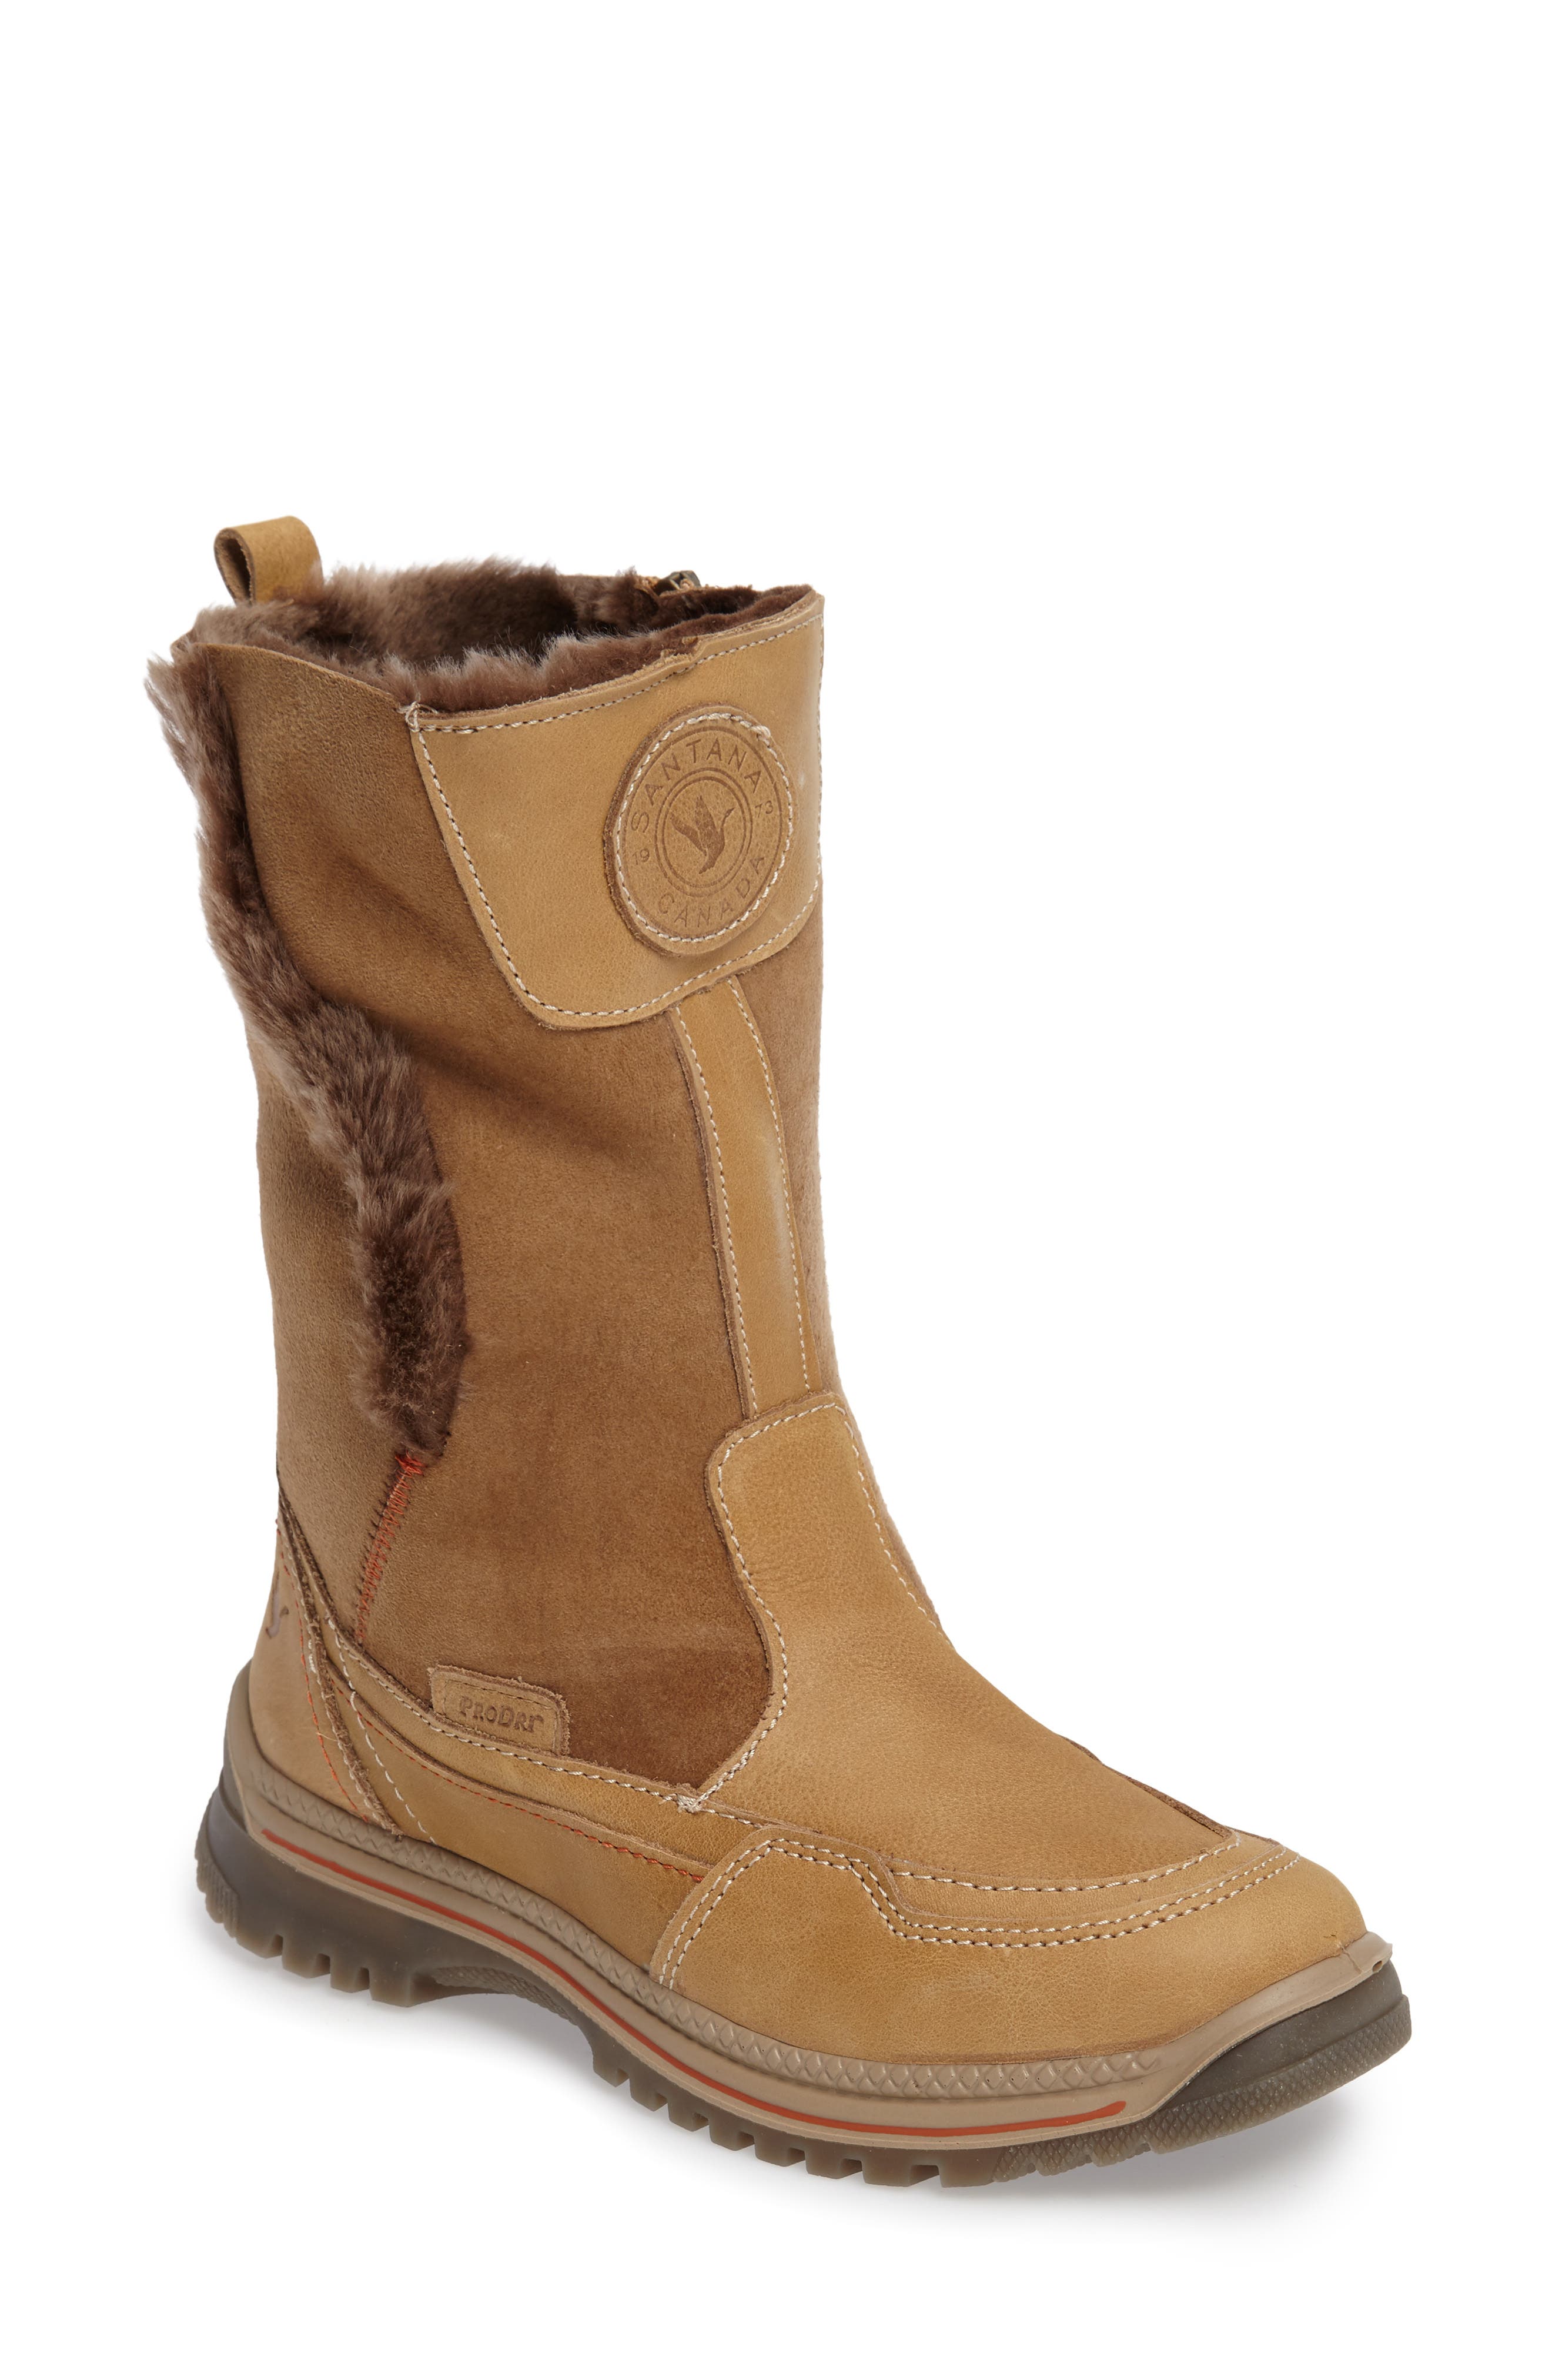 waterproof leather boots canada